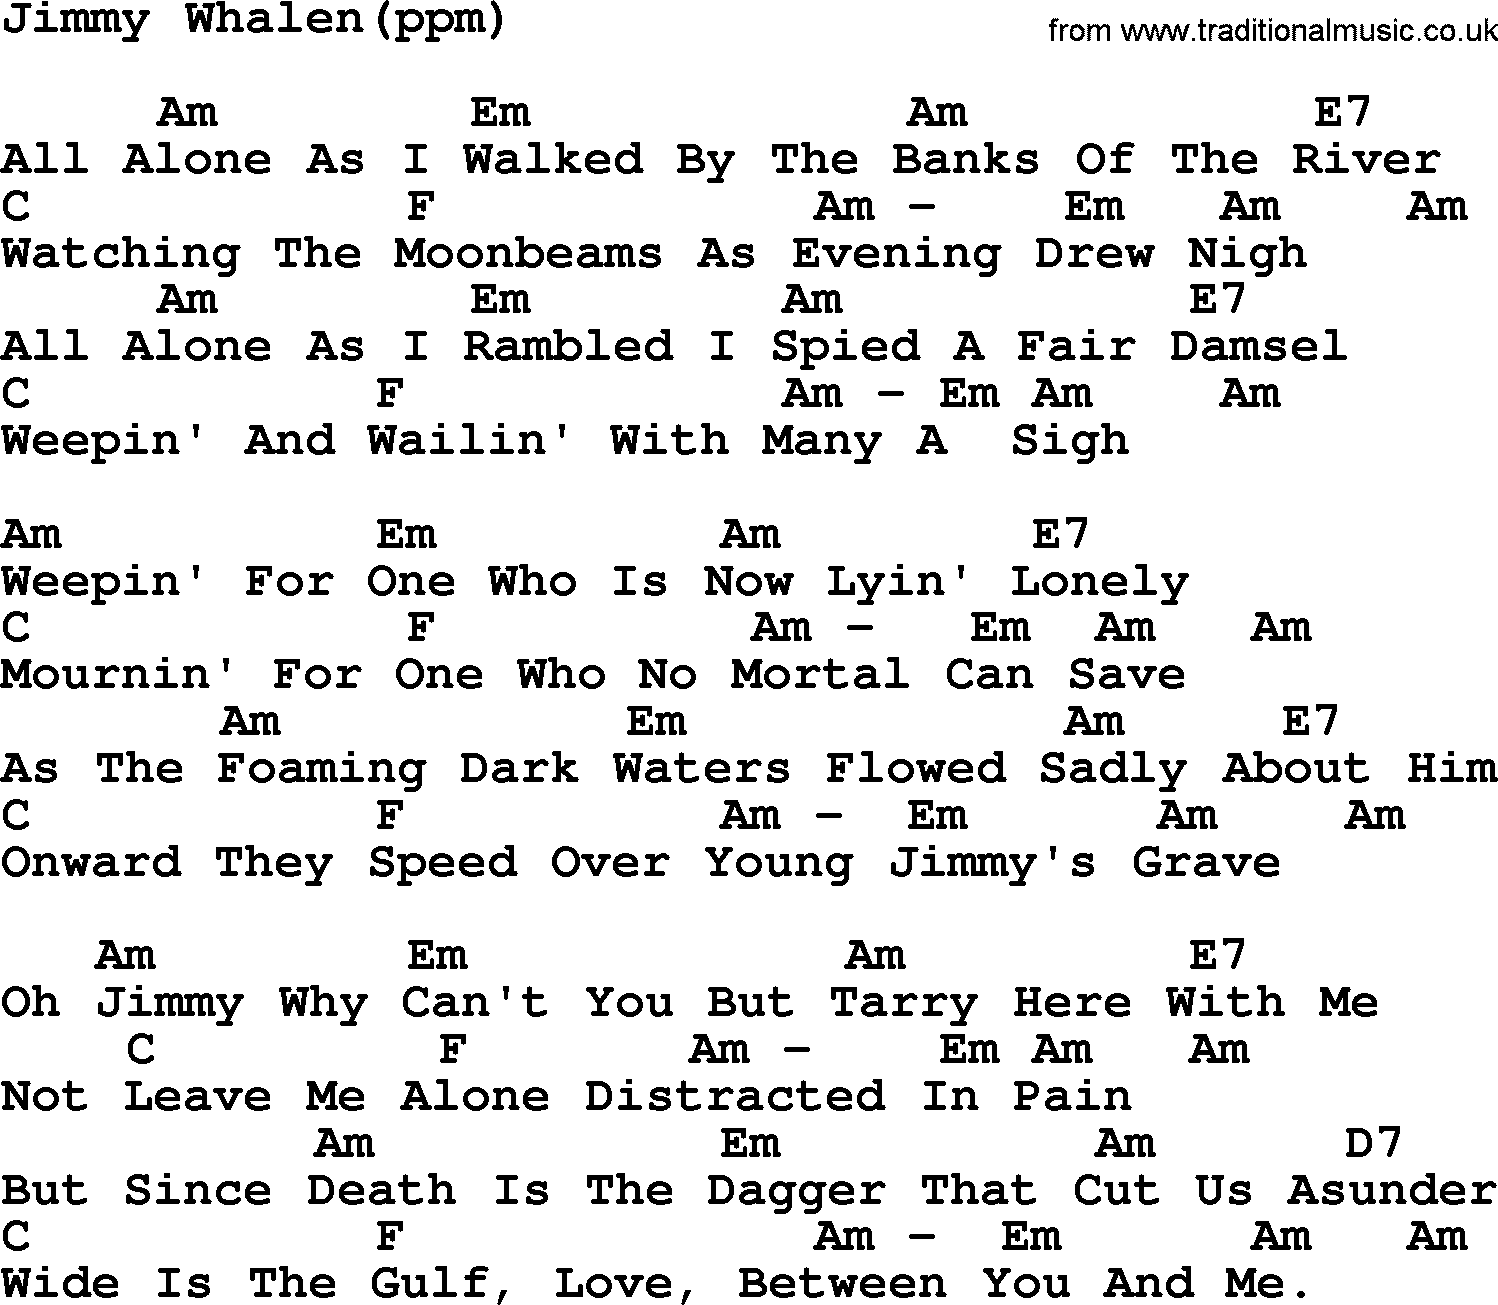 Peter, Paul and Mary song Jimmy Whalen, lyrics and chords